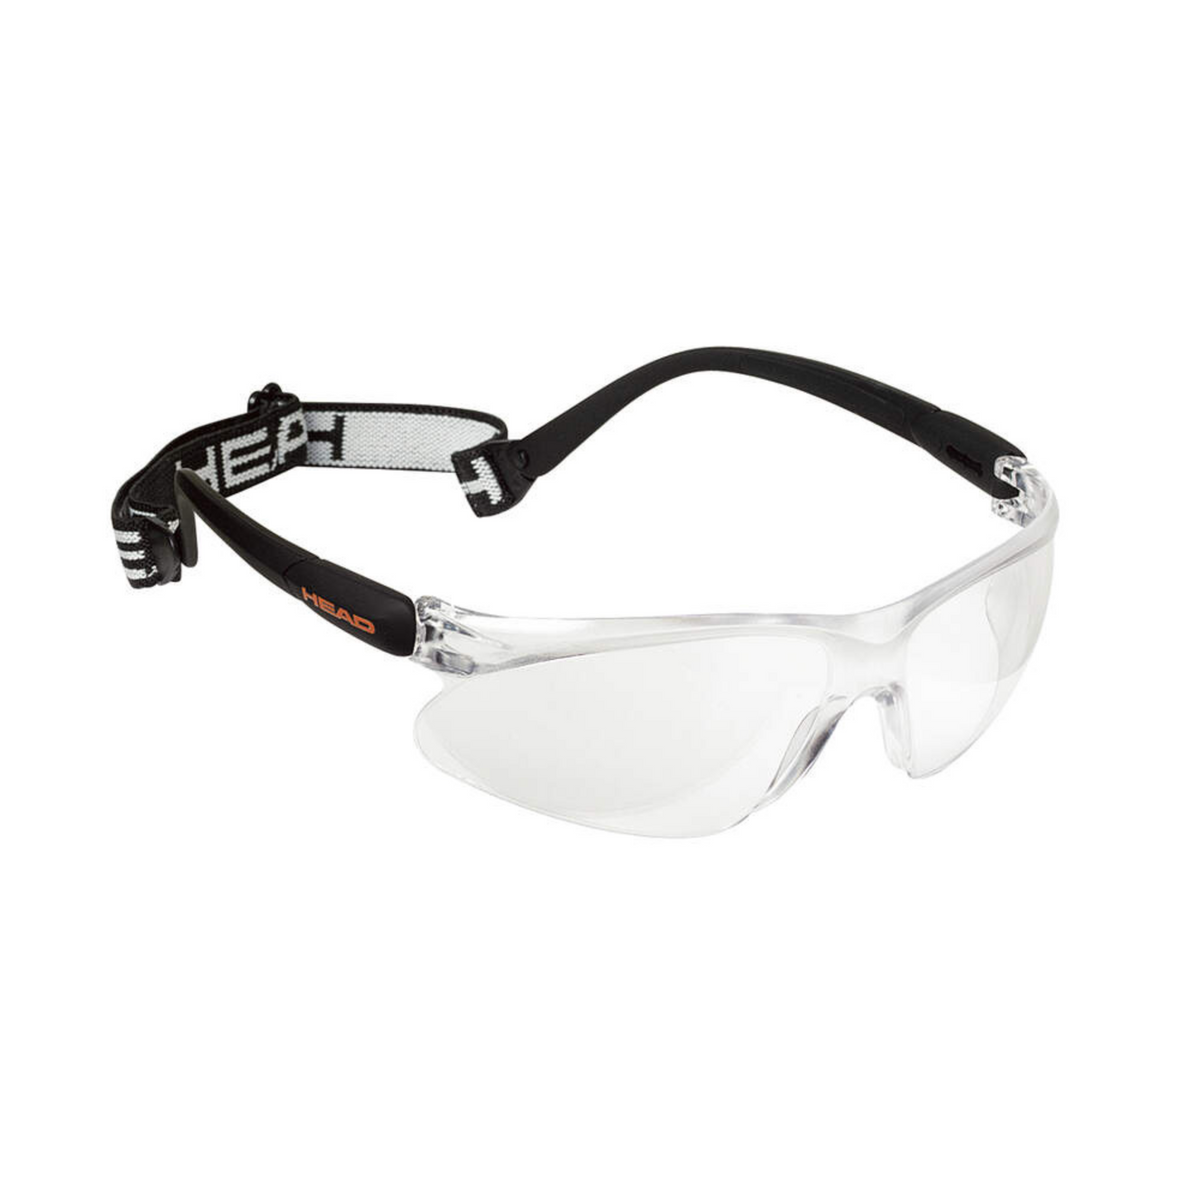 Head goggles for racquet sports tennis and racquetball